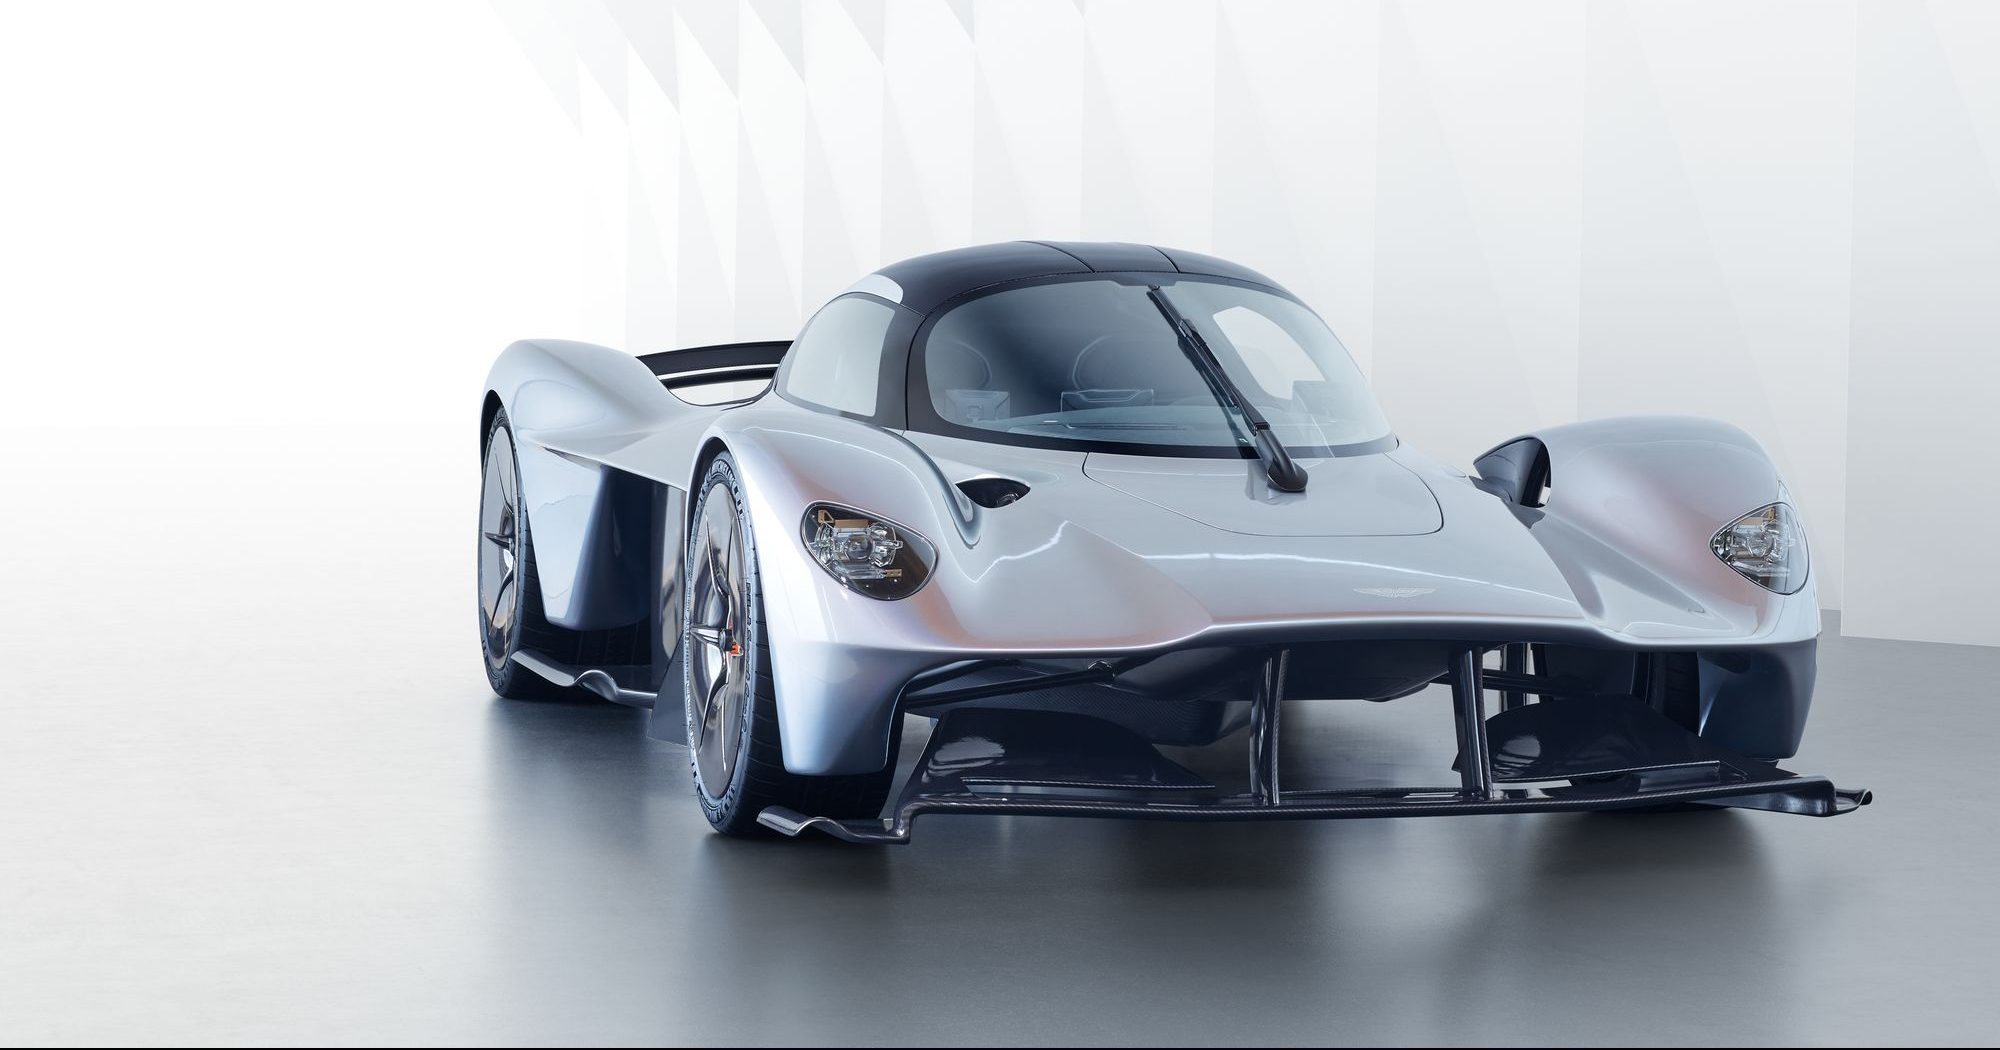 bao mike tyson surprised the world by giving serena williams a super rare aston martin valkyrie when she won the title of greatest tennis player of all time 653589852f898 Mike Tyson Surprised The World By Giving Serena Williams A Super Rare Aston Martin Valkyrie When She Won The Title Of Greatest Tennis Player Of All Time.